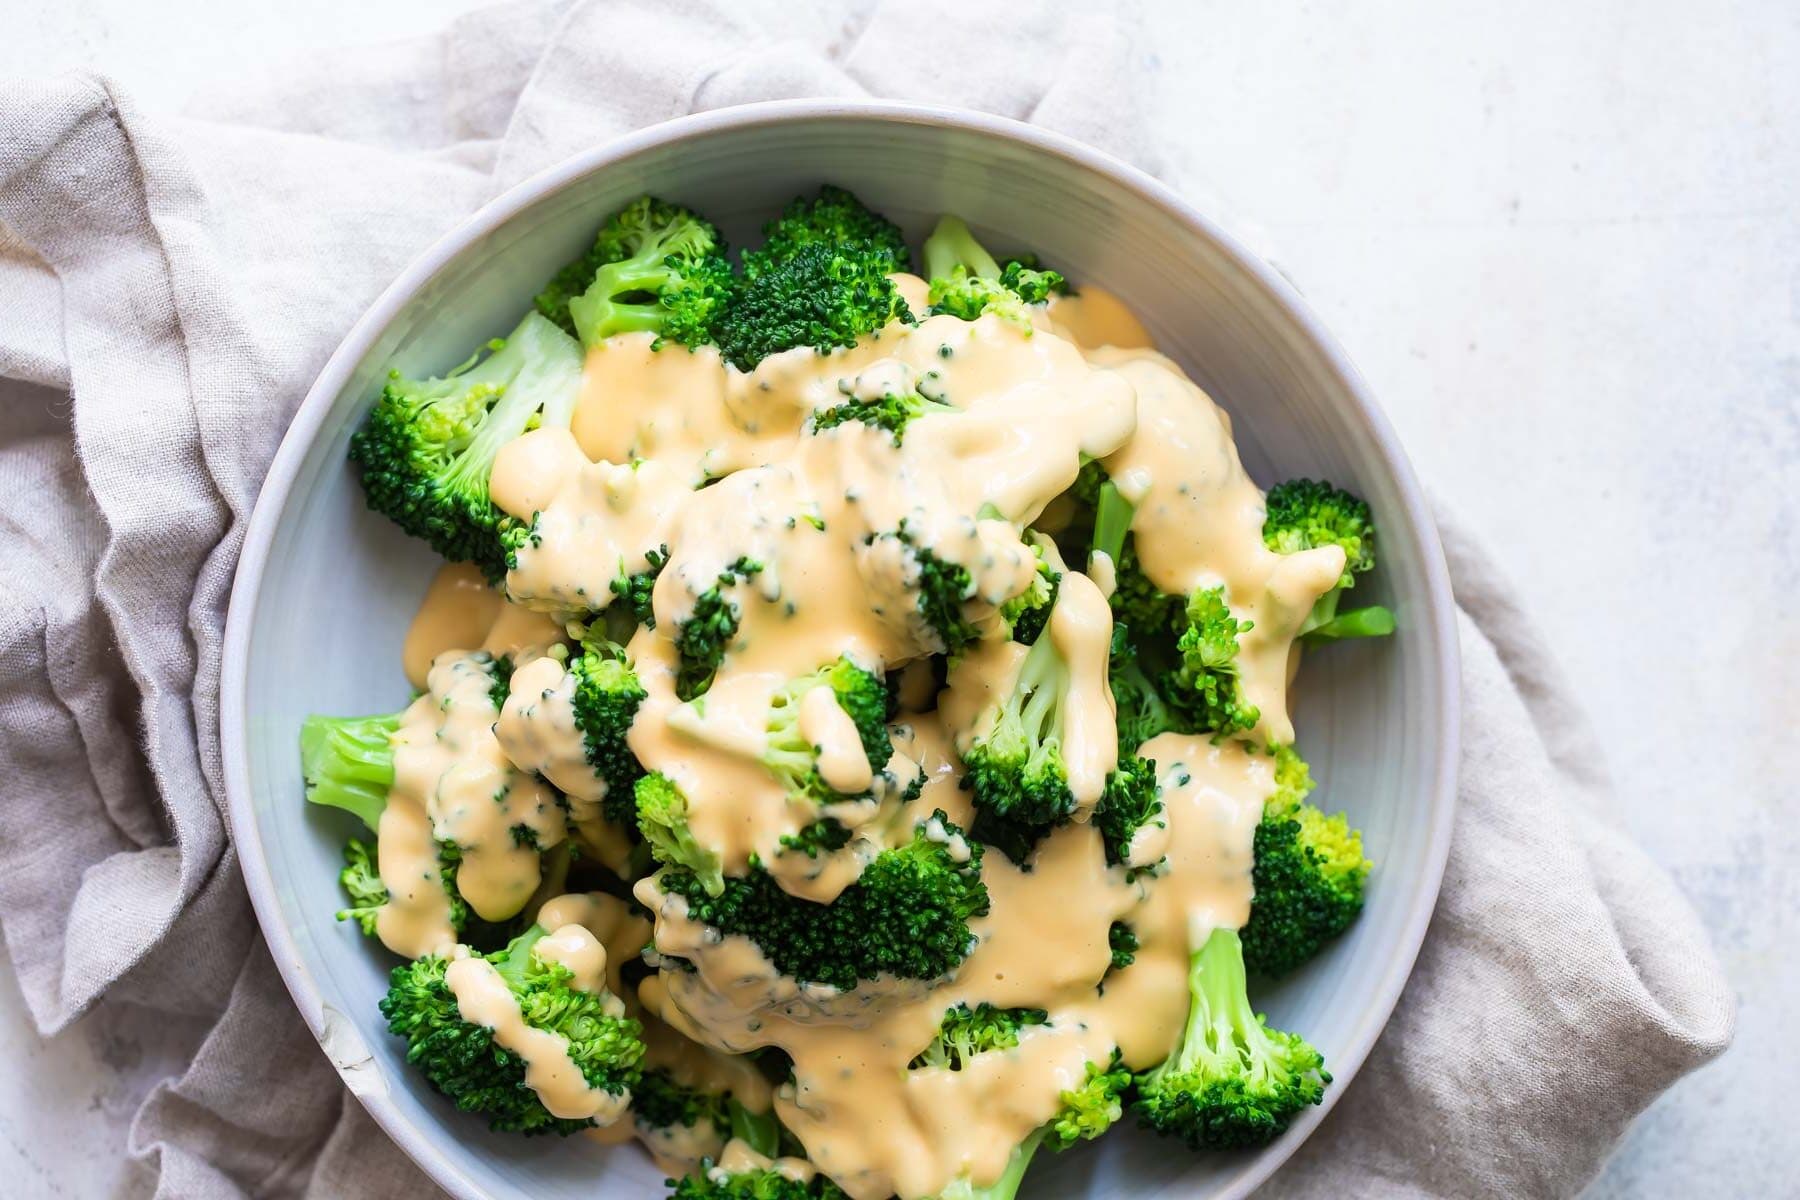 A bowl of blanched broccoli with cheese sauce drizzled on top.